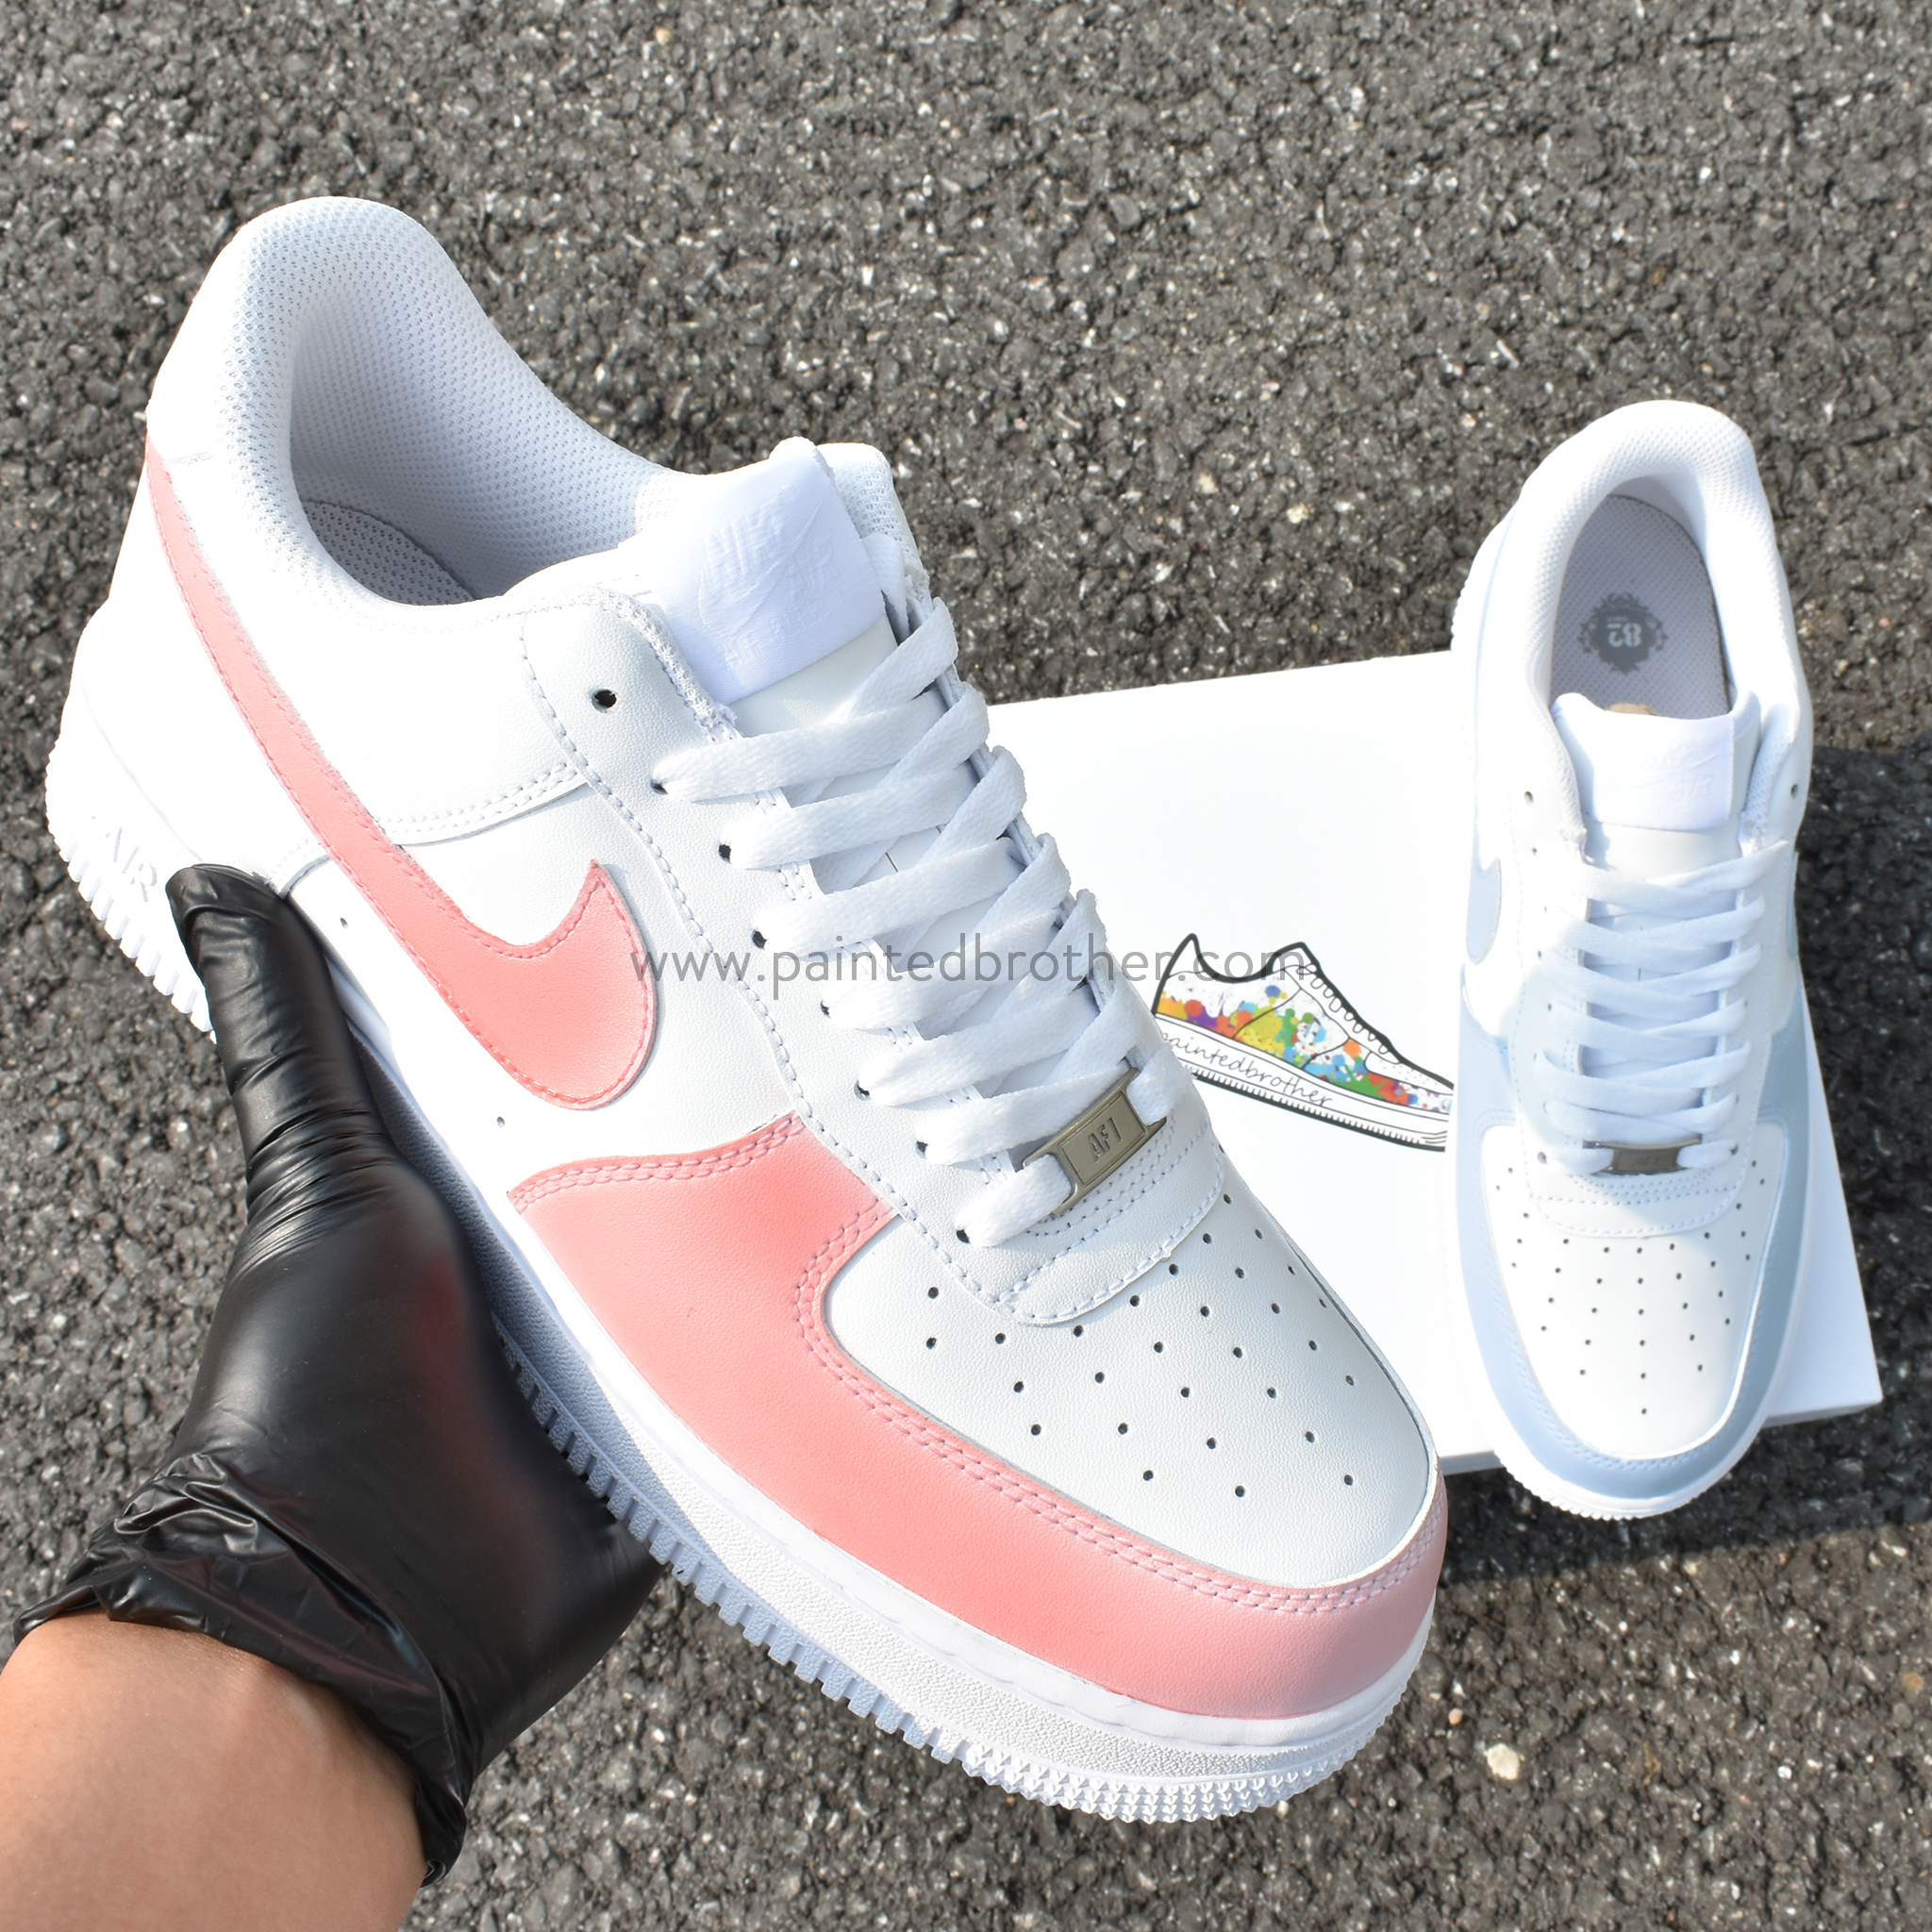 Custom Hand Painted Chameleon Nike Air Force 1 Low-paintedbrother